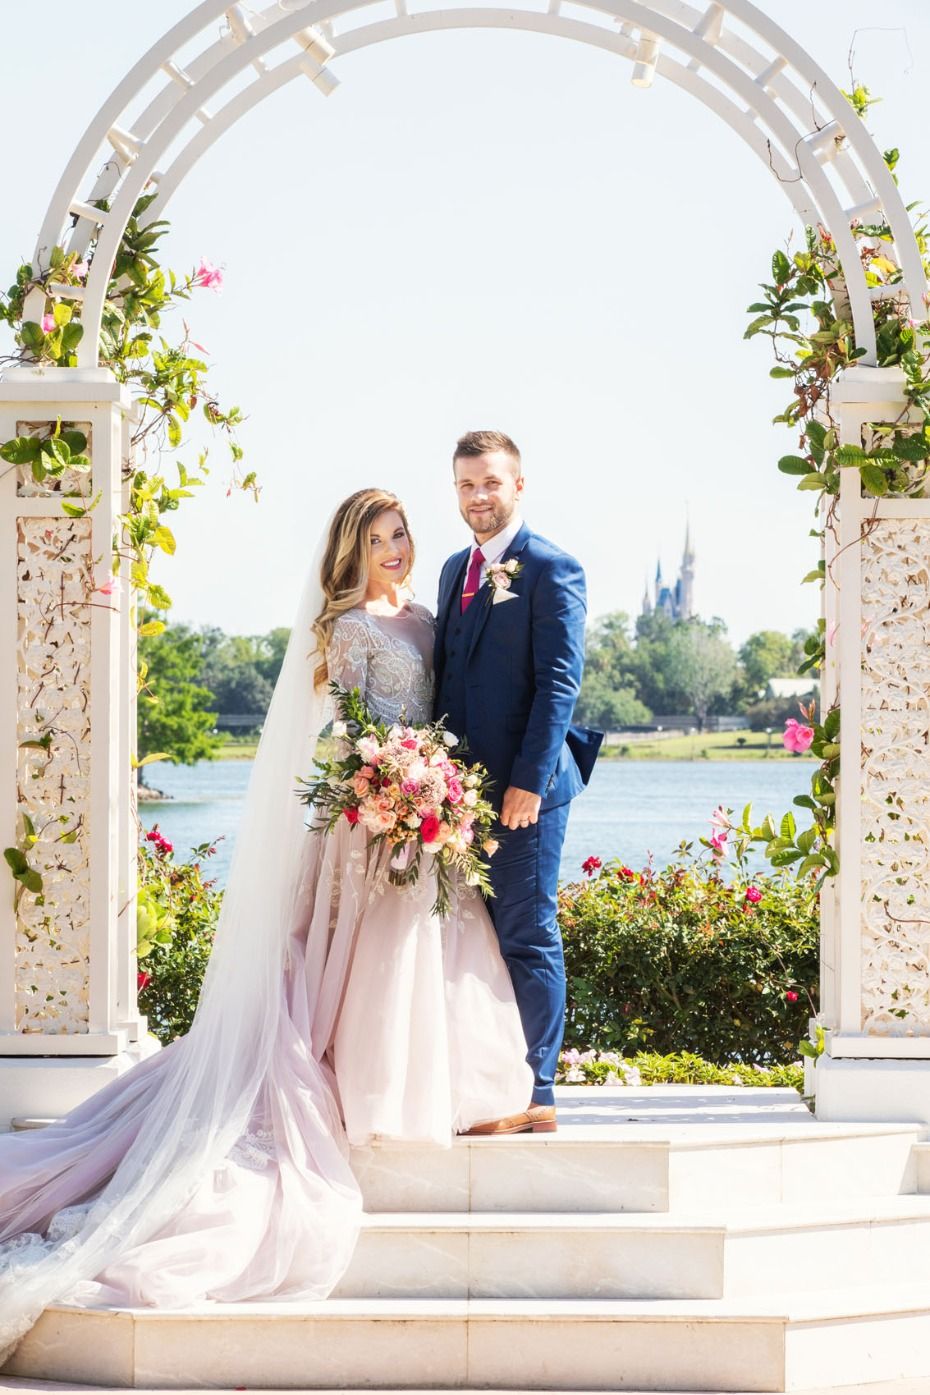 This Is How Much a Disney World Wedding Costs